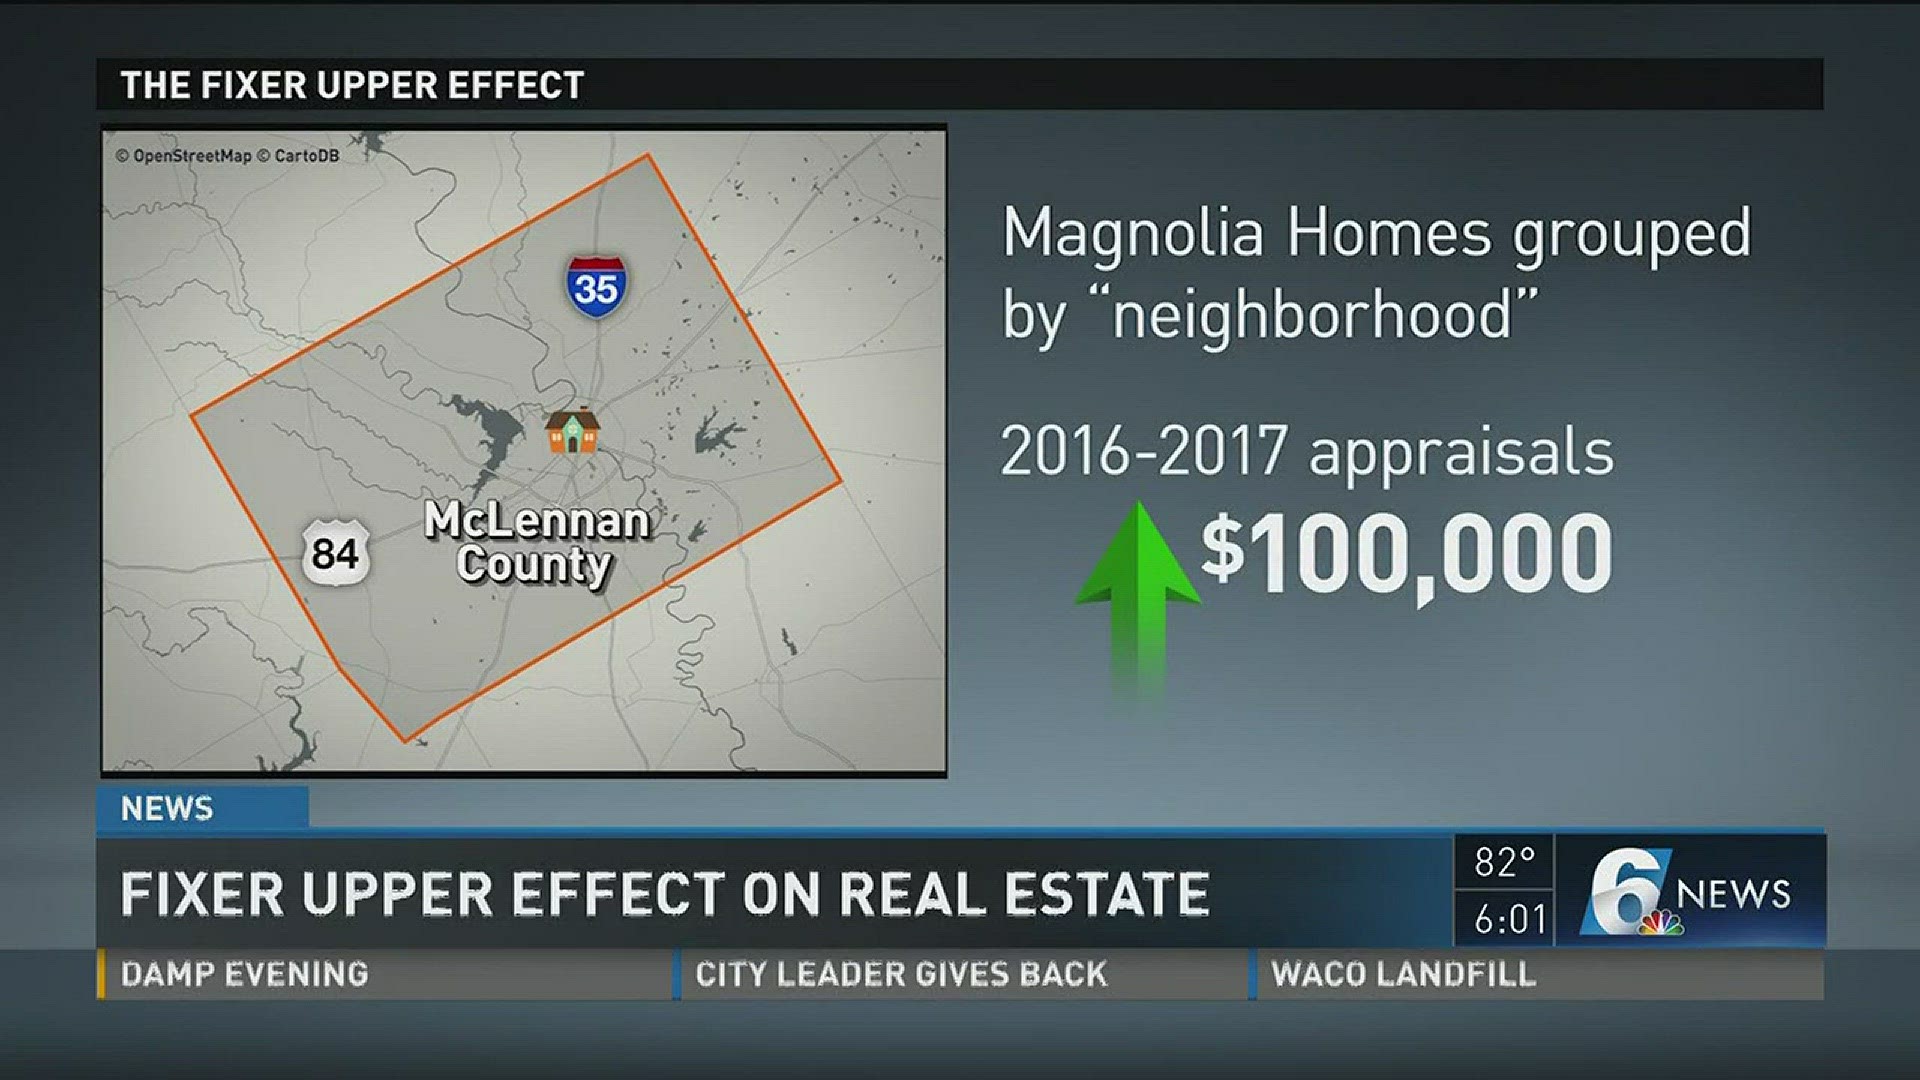 As far as real estate goes, for tax purposes, McLennan County officials group all of the Magnolia Homes into one neighborhood, even through they aren't in the same geographical area.